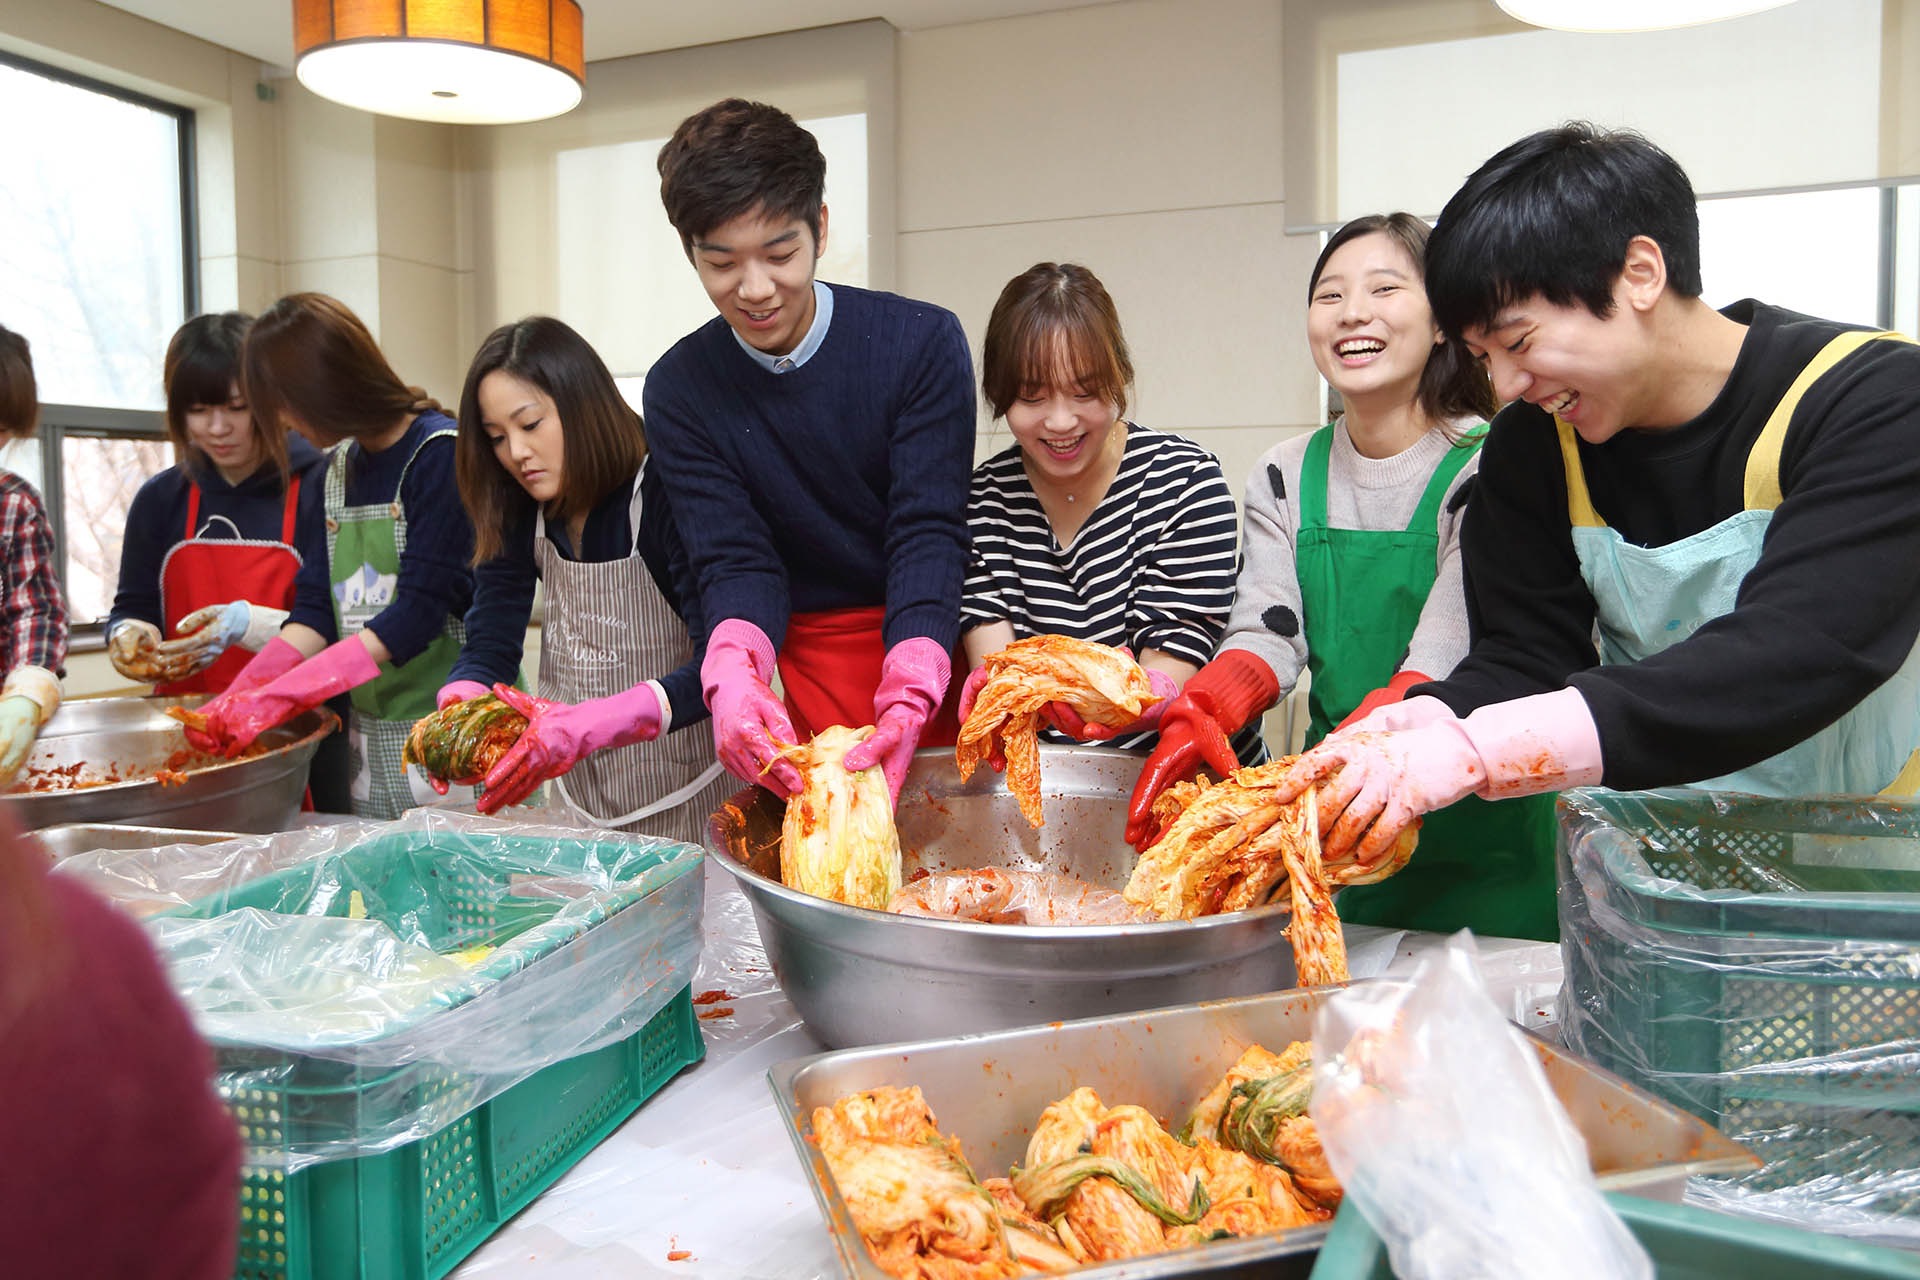 'Kimchi making' is designated as cultural property of Korea